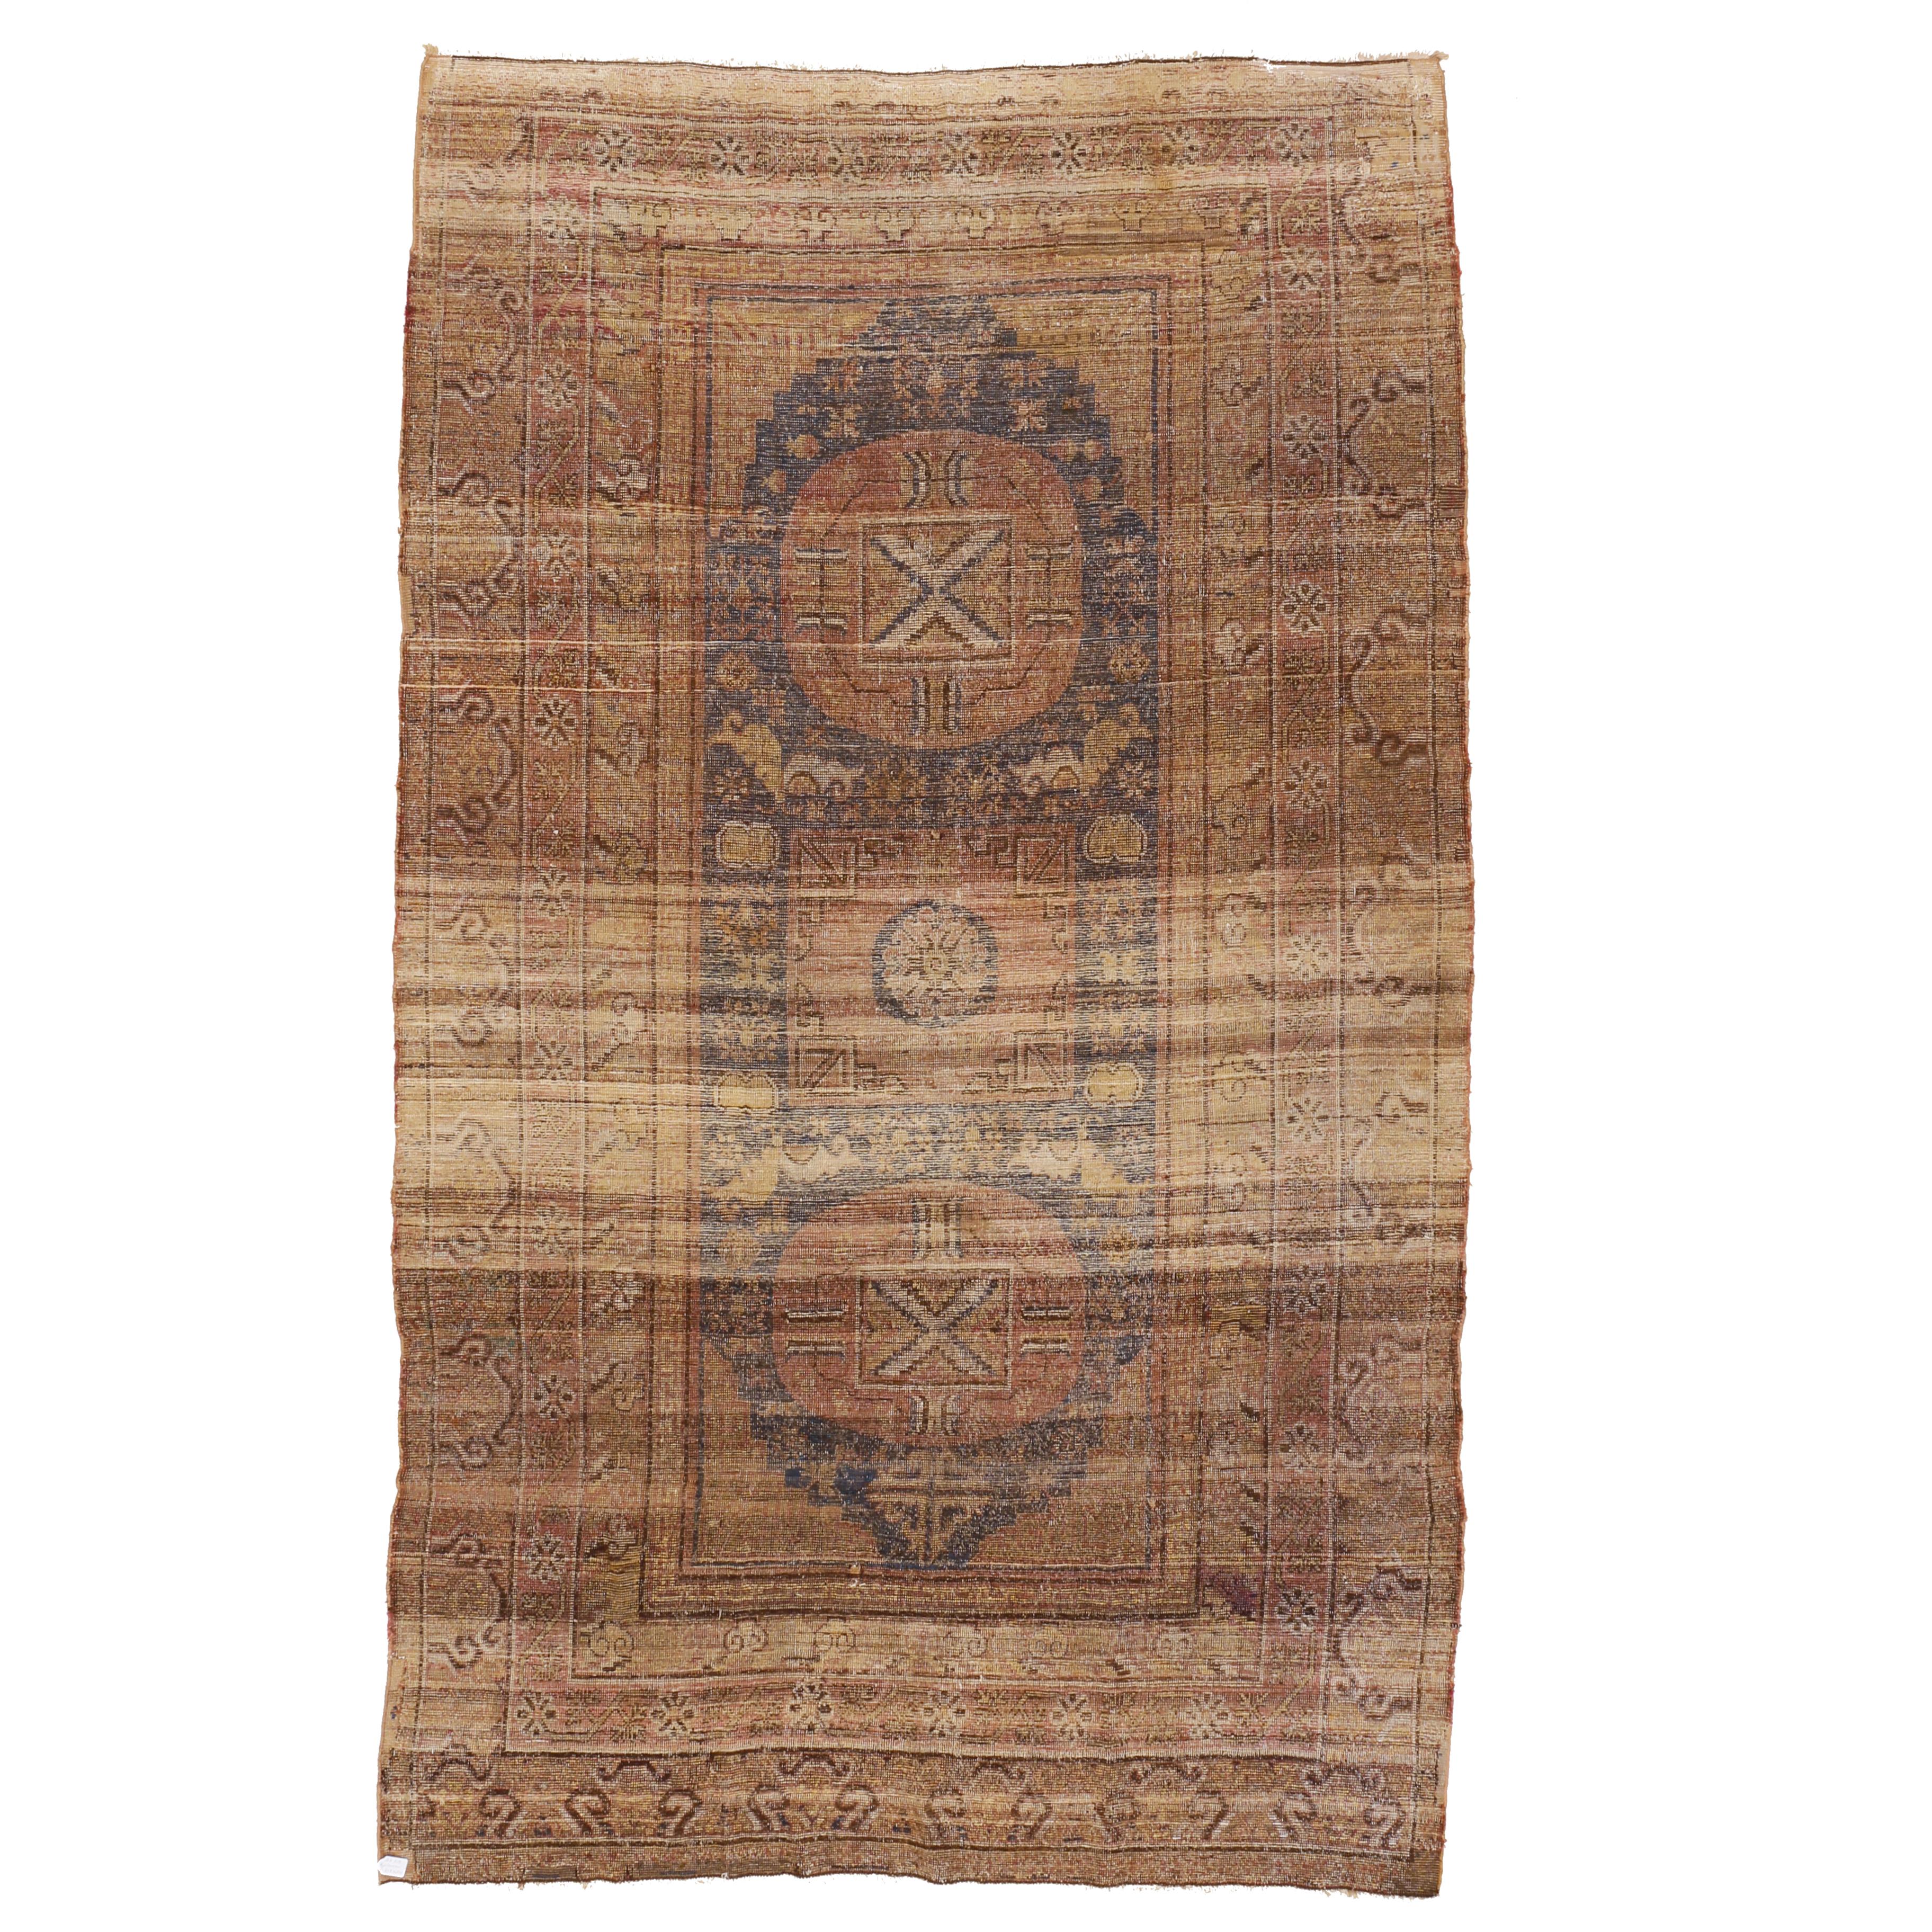 The rugs of east Turkestan, called Khotan, Yarkand, Kashgar or more commonly Samarkand - have always represented the rarest and most coveted weavings both among interior designers and collectors. Being in perfect balance between curvilinear and